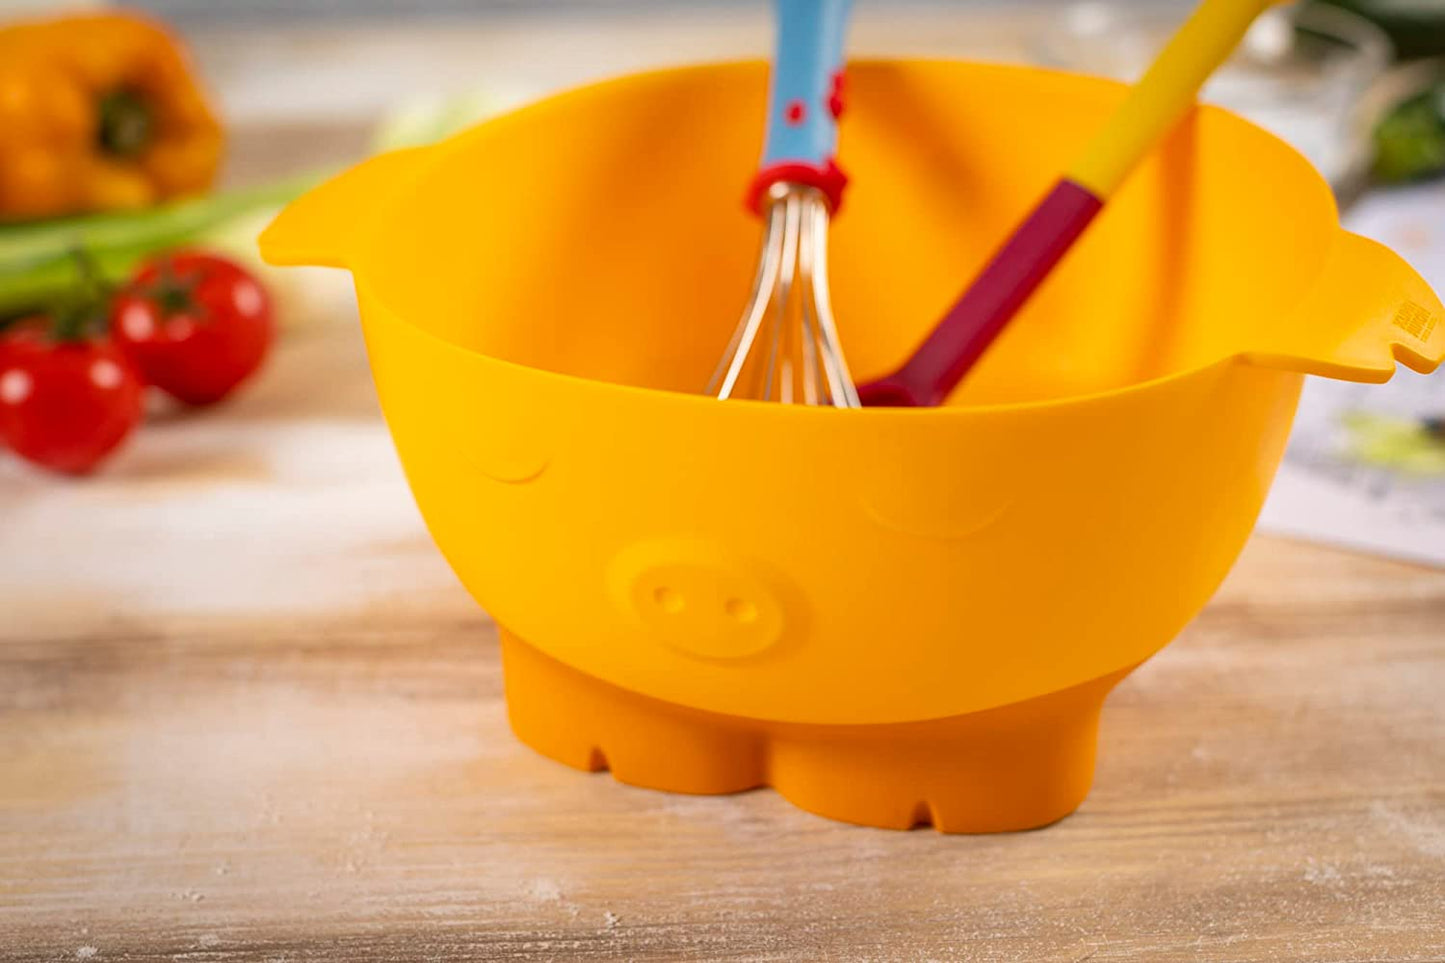 yellow bowl with pig face and feet on a wooden table with spoon and whisk in it.